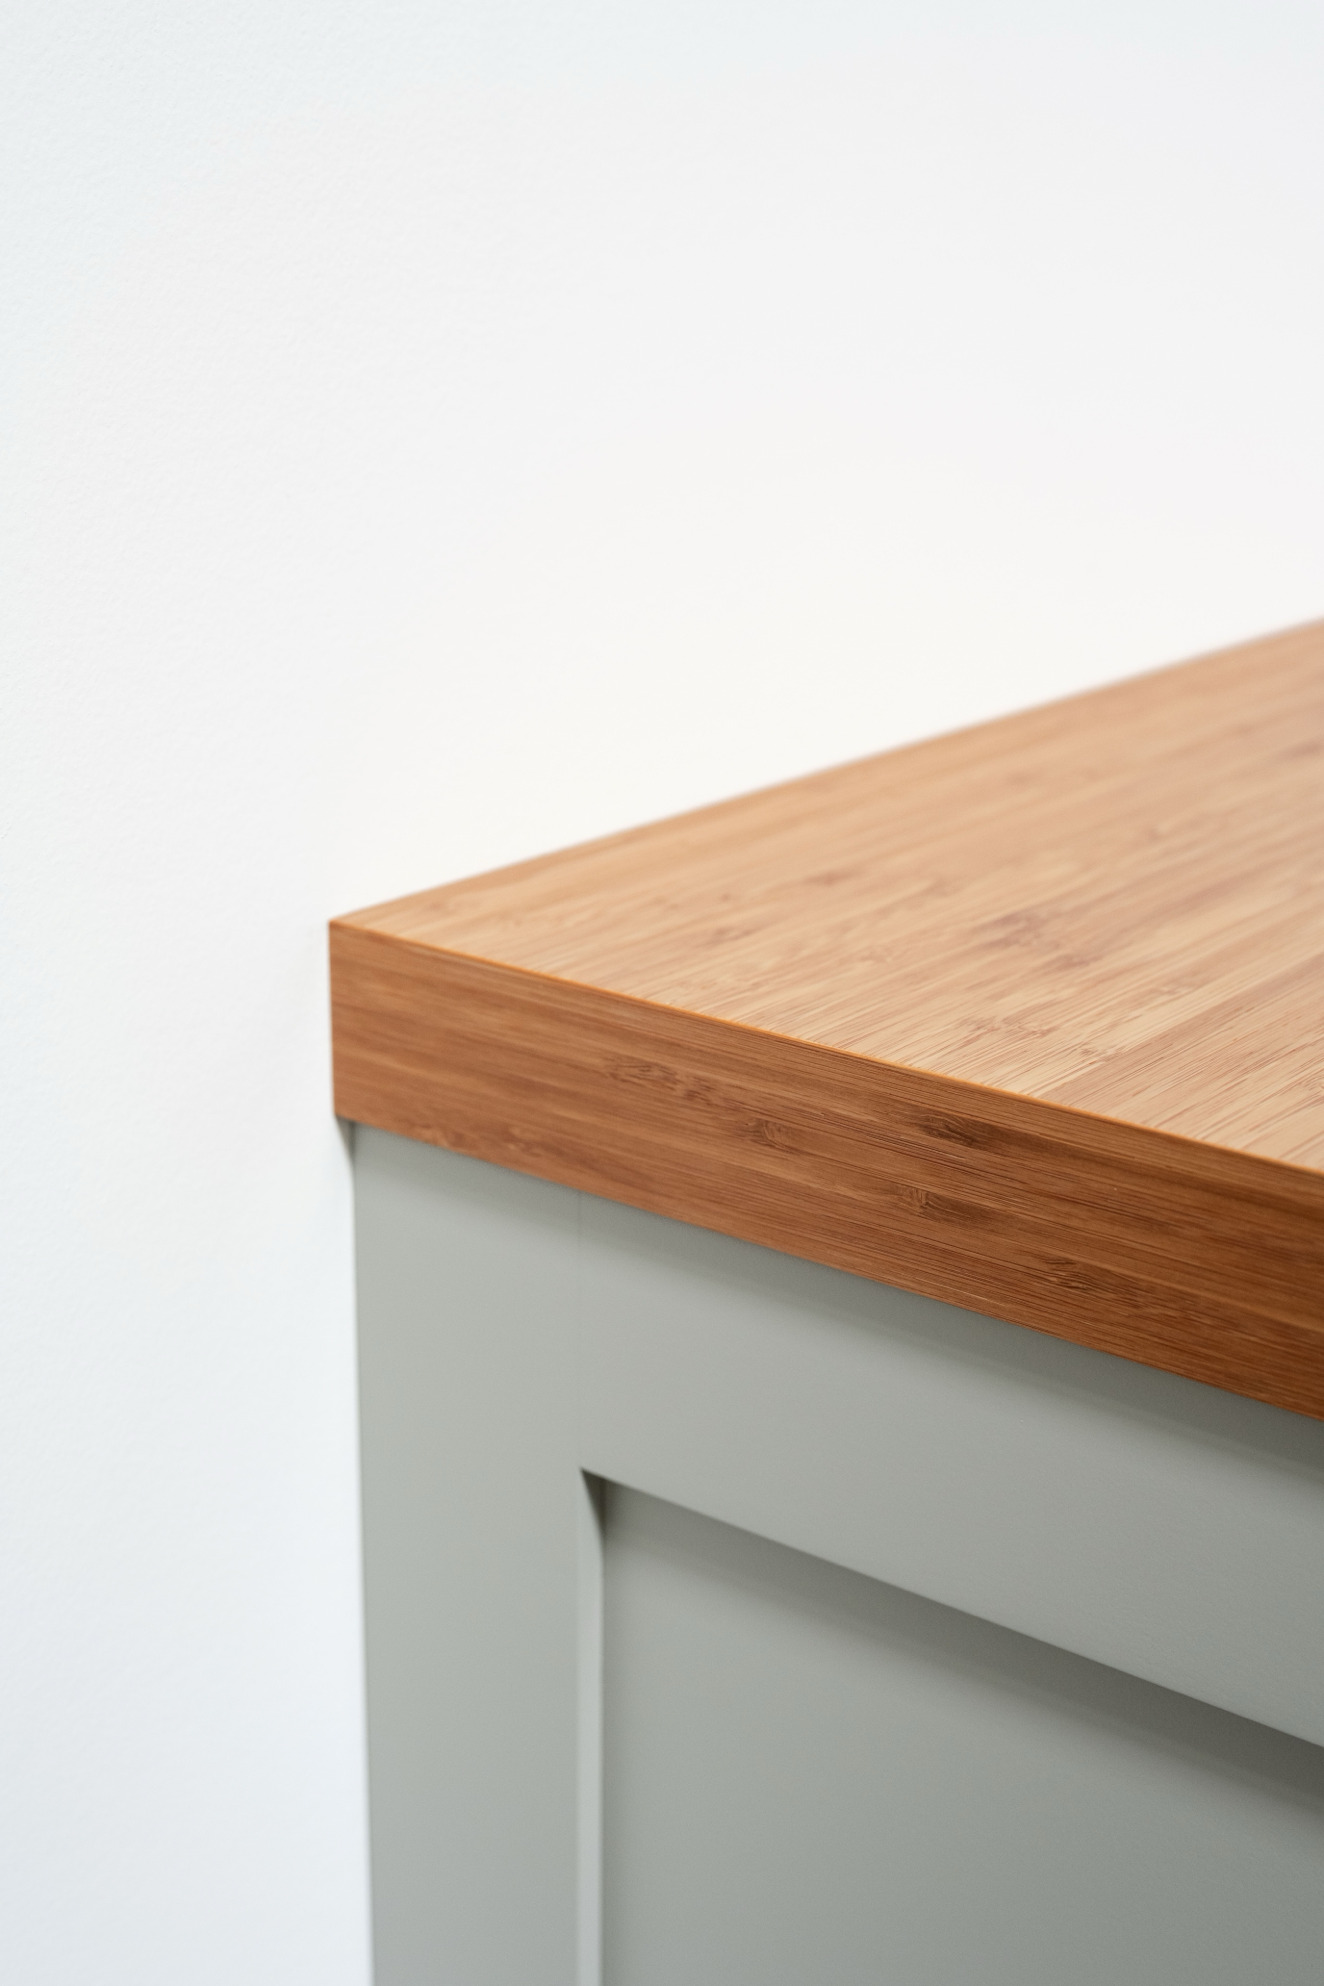 Bamboo 1.75" thick Cabinet Top / Slab Shelf